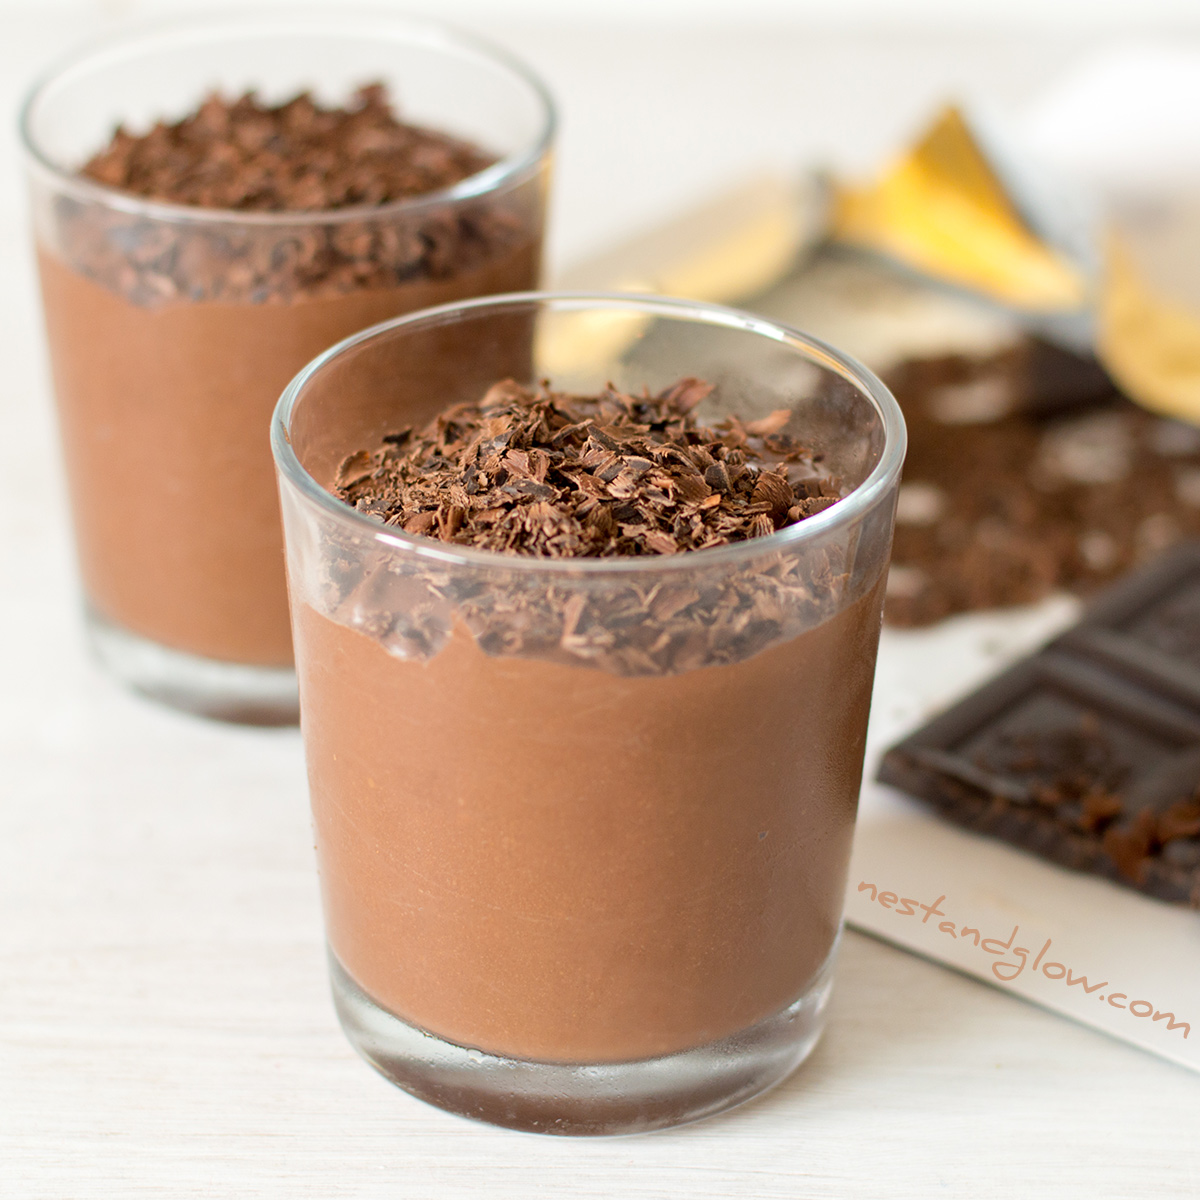 2 Ingredient Chocolate Protein Mousse – Nest and Glow